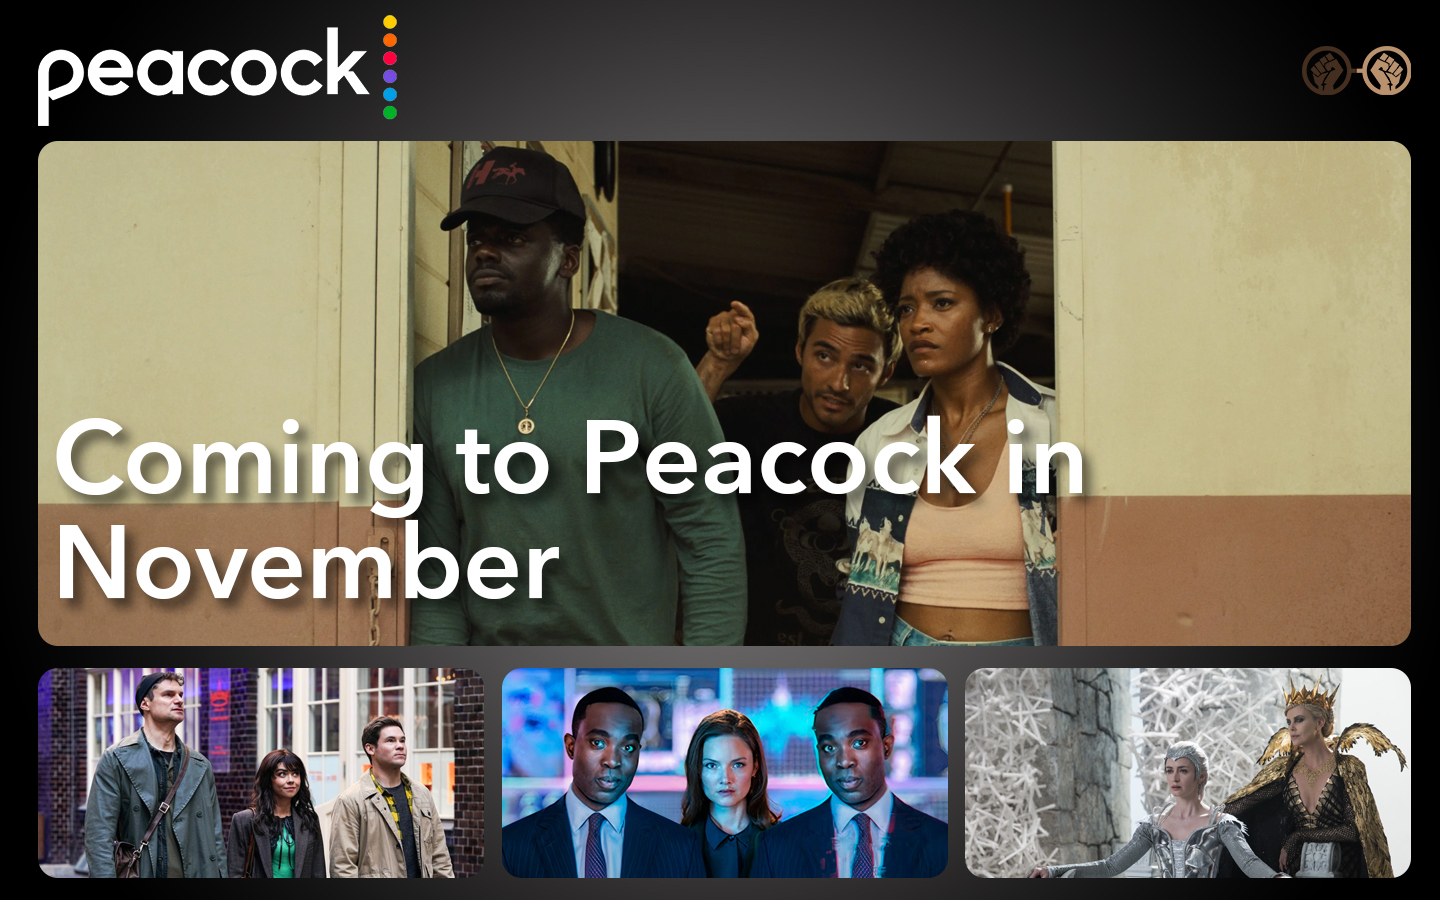 All New Original Films And TV Coming To Peacock In November